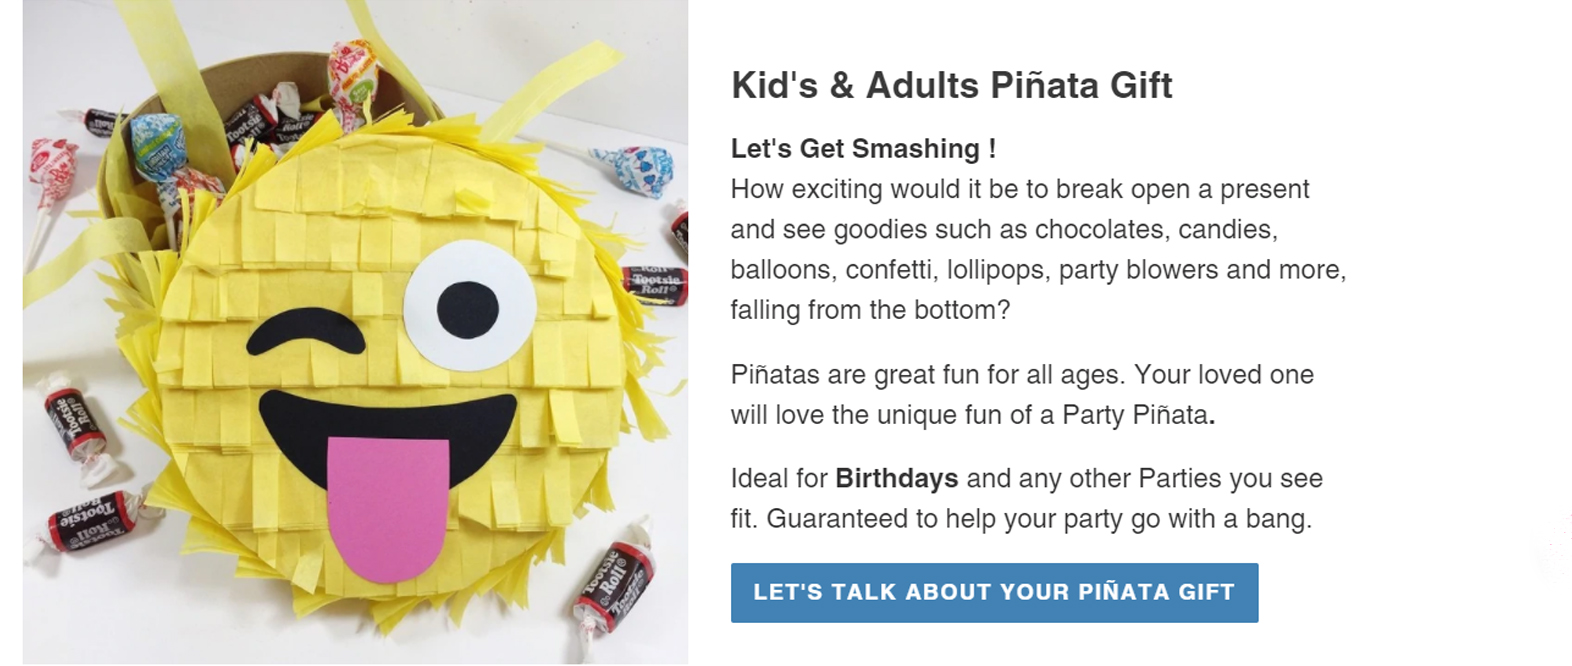 Send a Pinata Gift. Ideal for any parties. Deivery Mauritius.